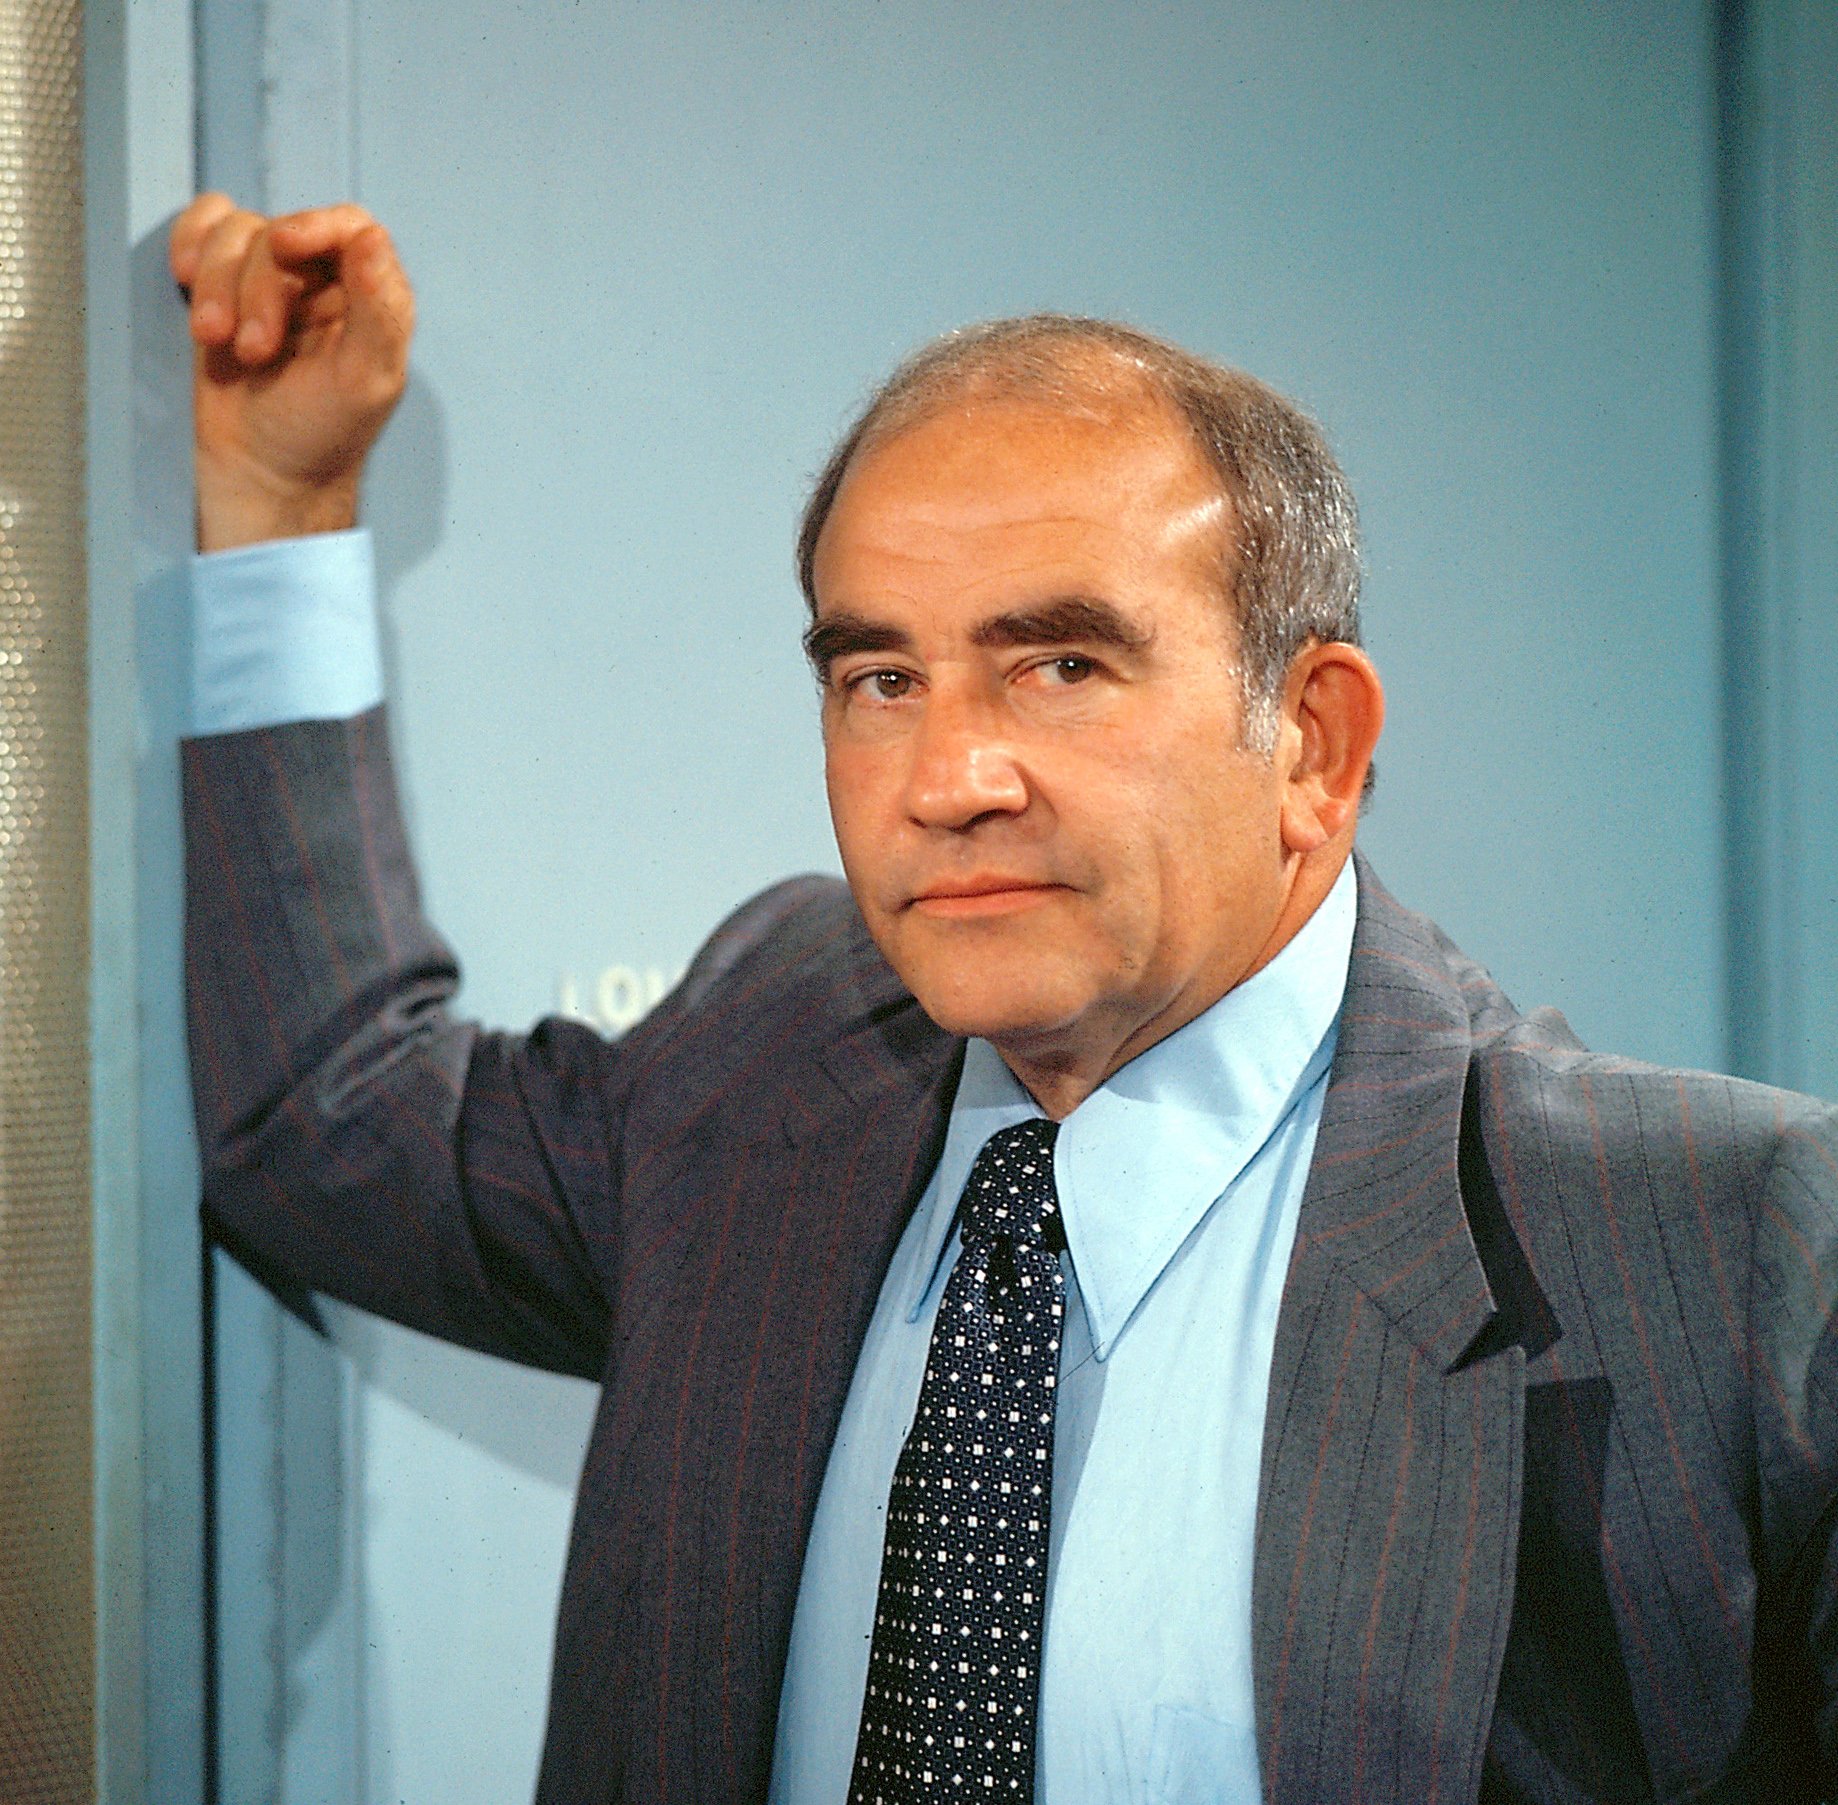 Ed Asner as Lou Grant leans on a door